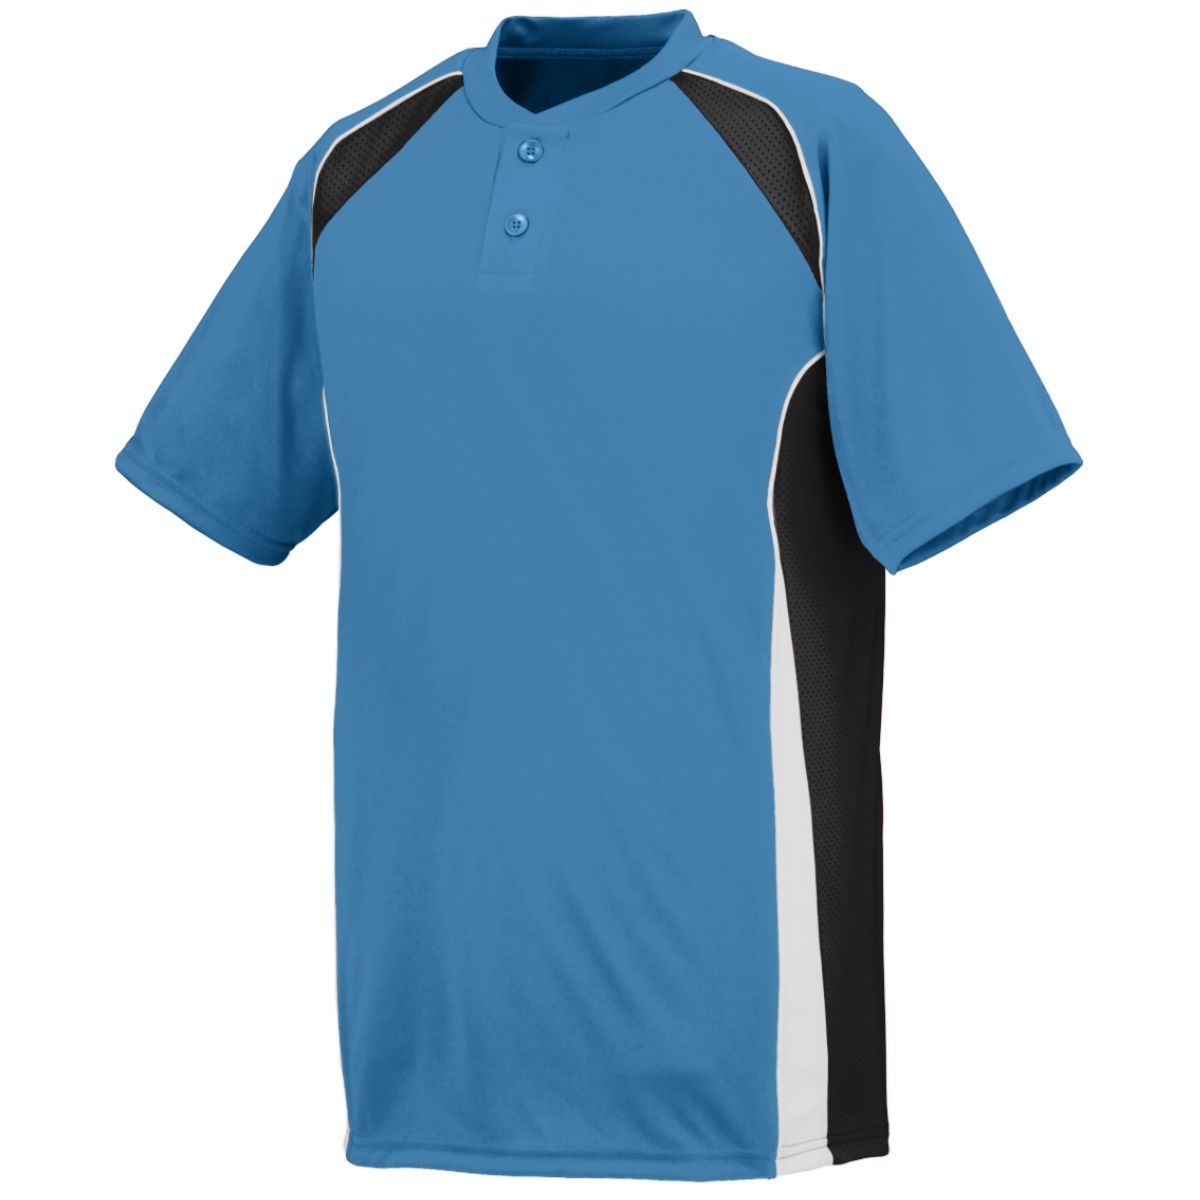 Augusta Sportswear Youth Base Hit Jersey in Columbia Blue/Black/White  -Part of the Youth, Youth-Jersey, Augusta-Products, Baseball, Shirts, All-Sports, All-Sports-1 product lines at KanaleyCreations.com